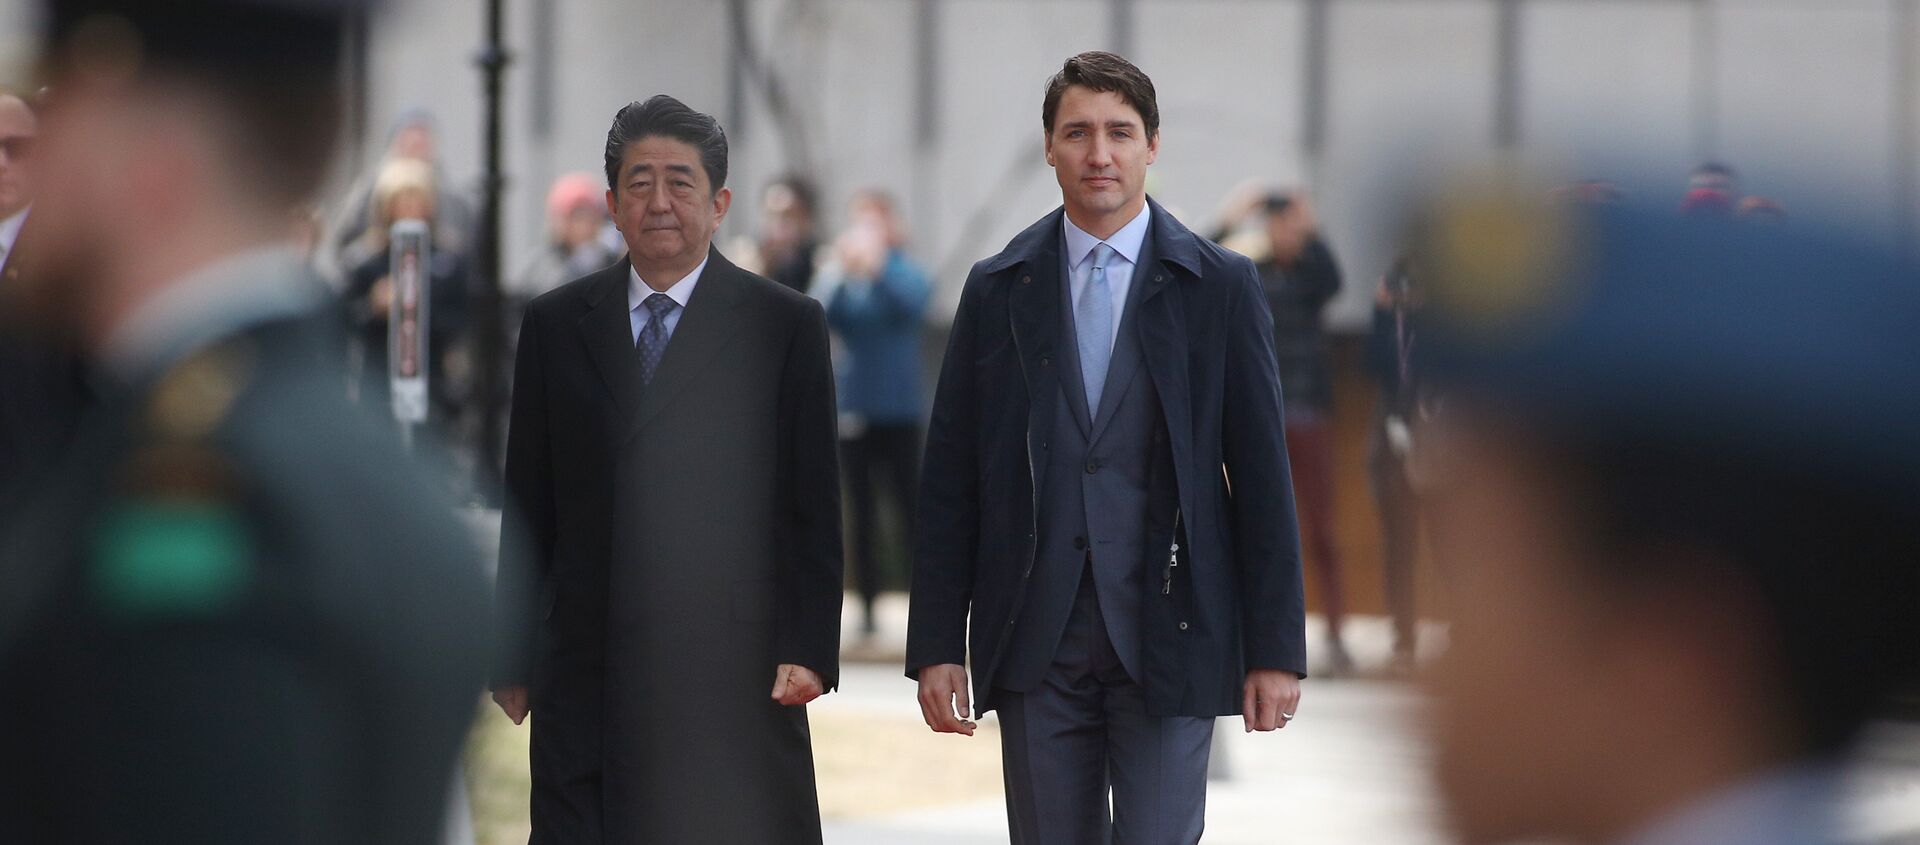 Japanese Prime Minister Shinzo Abe (L) walks with Canadian Prime Minister Justin Trudeau during a welcoming ceremony on Parliament Hill in Ottawa, Ontario, on April 28, 2019.  Lars Hagberg / AFP - Sputnik Afrique, 1920, 30.04.2019